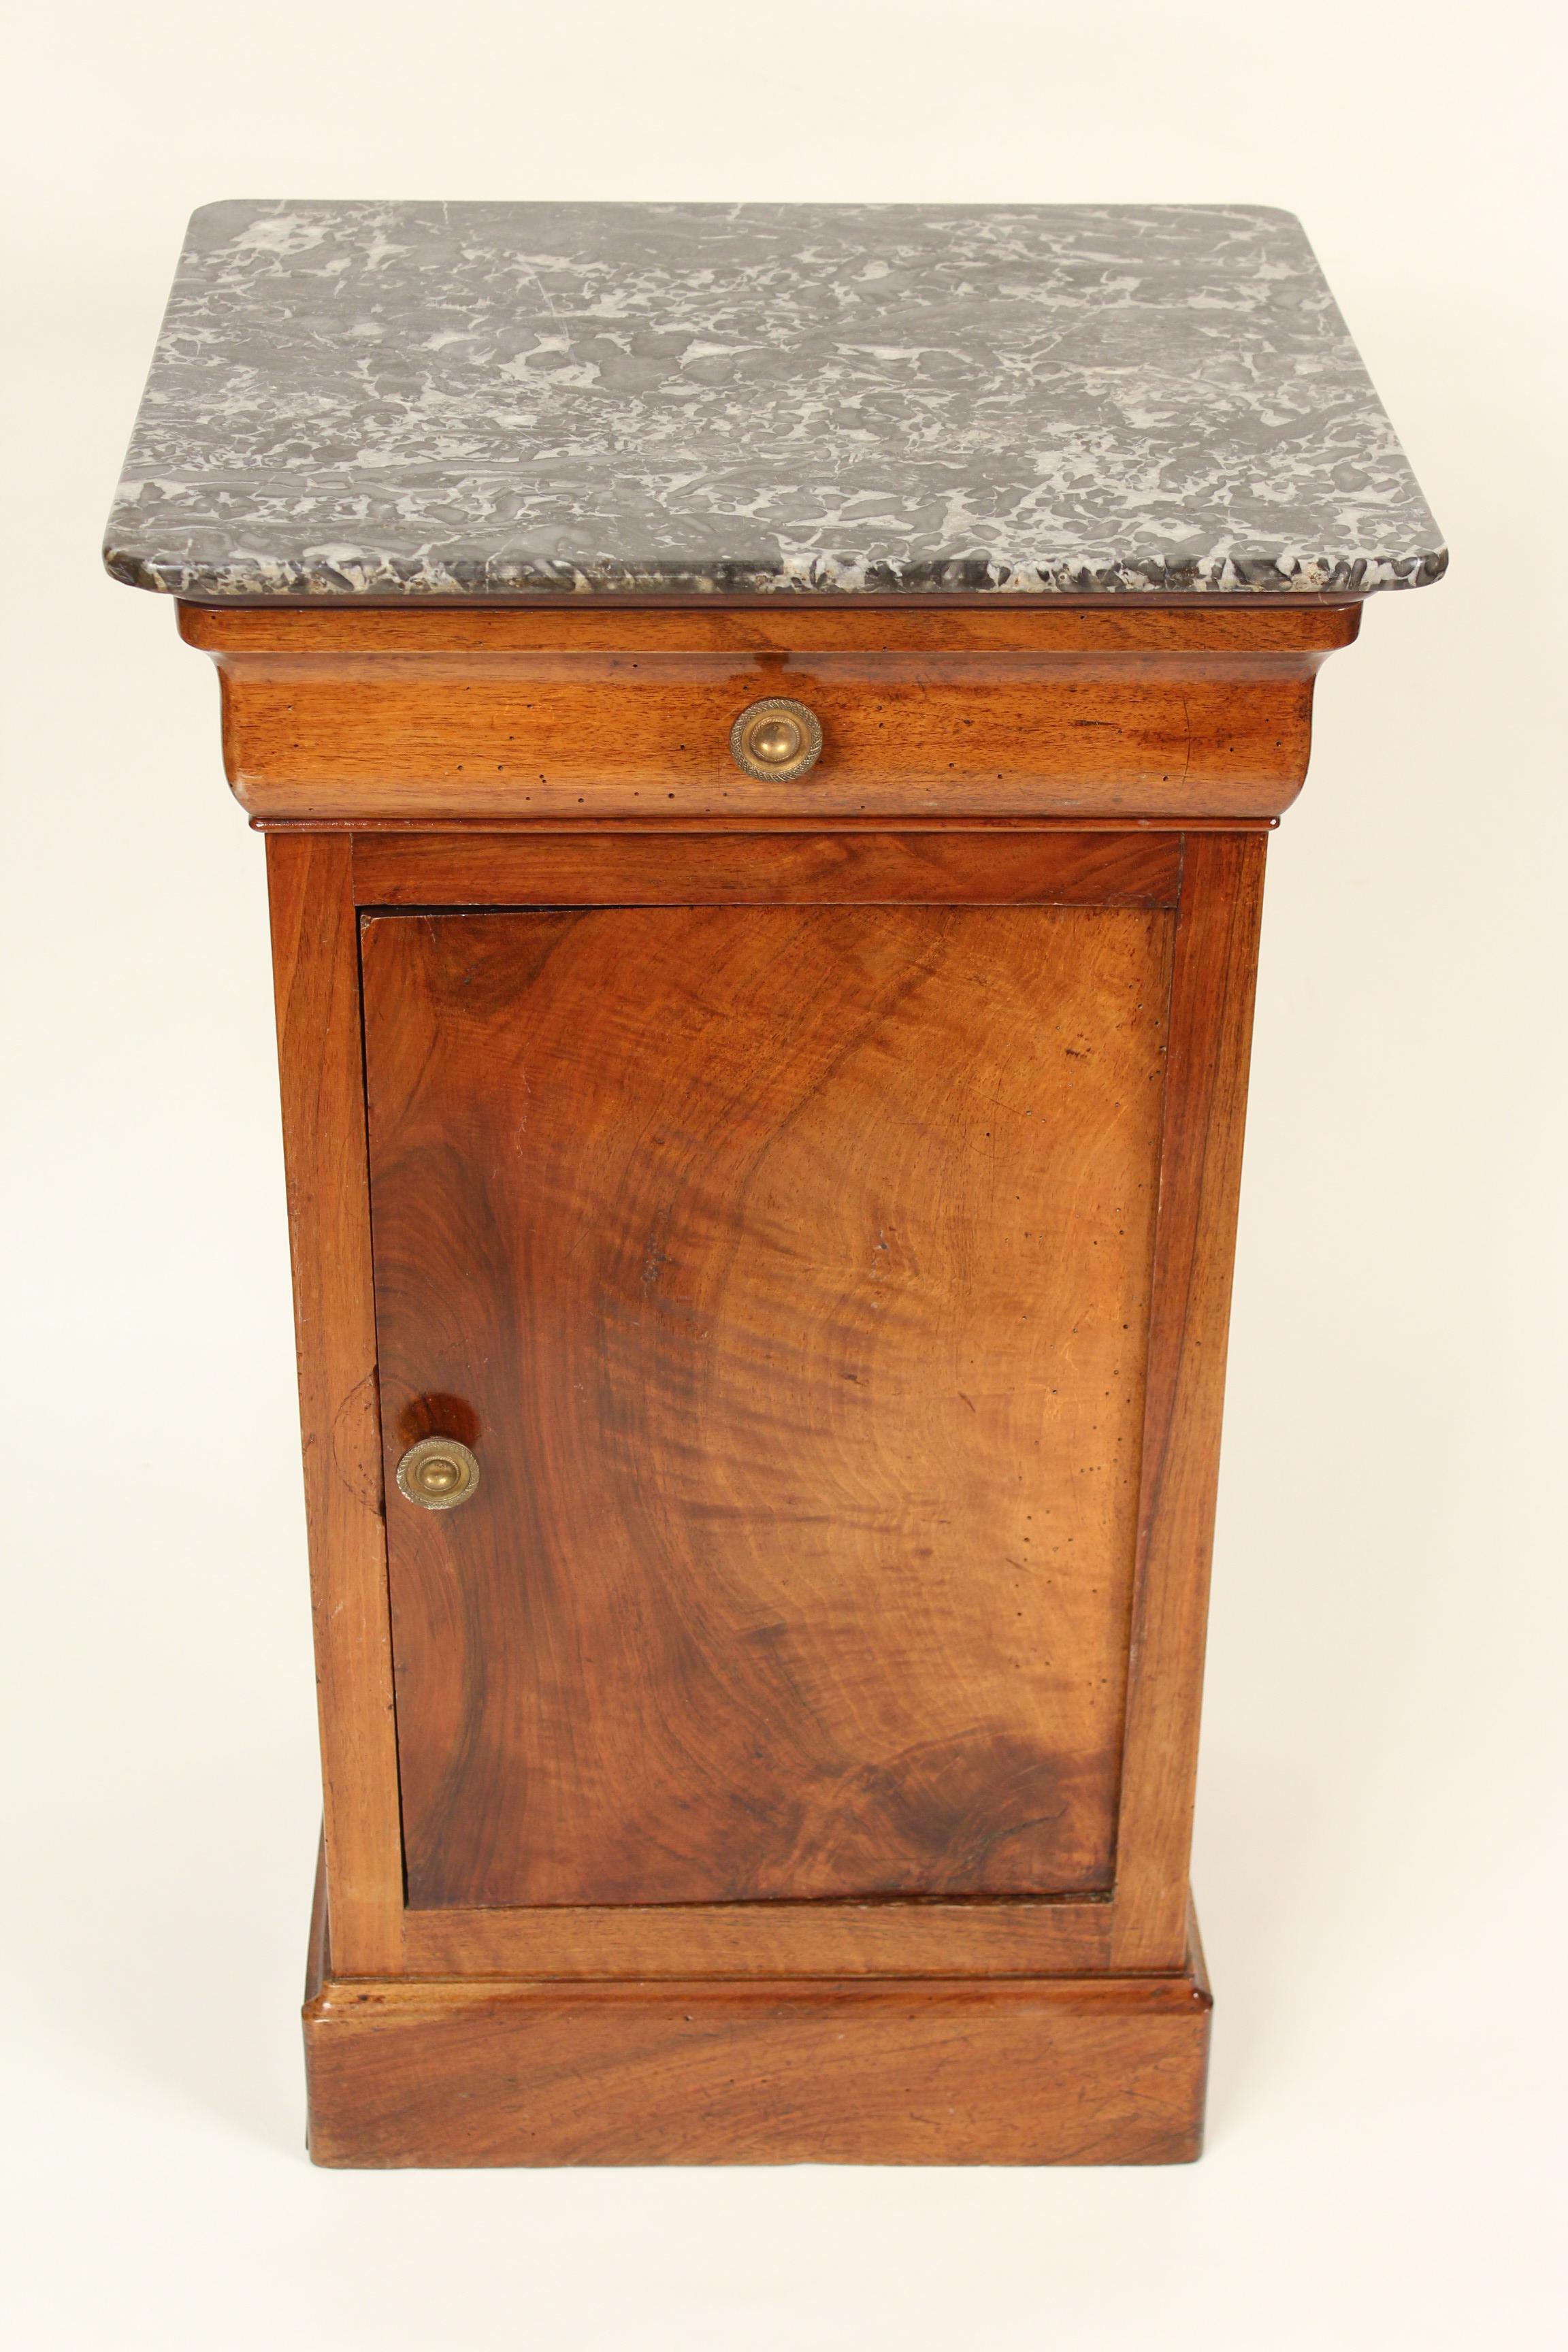 Antique Louis Philippe style walnut side table with original marble top, circa 1880. Notice the beautiful piece of walnut that was used for the door, both front and back are exquisite. Nice old original patina.